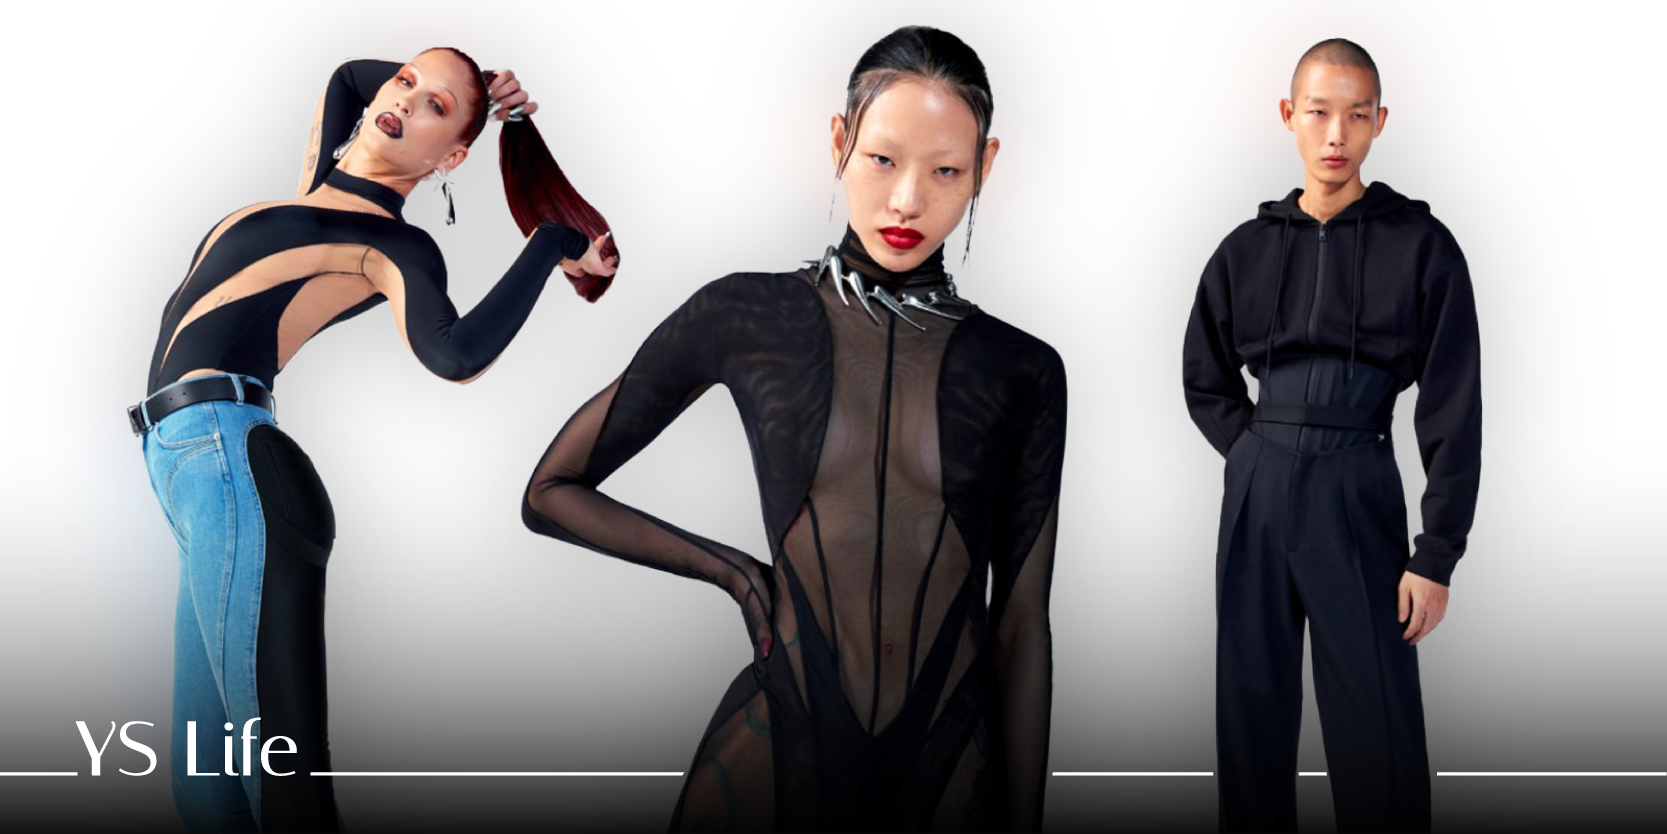 The bold and the beautiful: H&M X Mugler collection blends Mugler sensibilities with high-street fashion